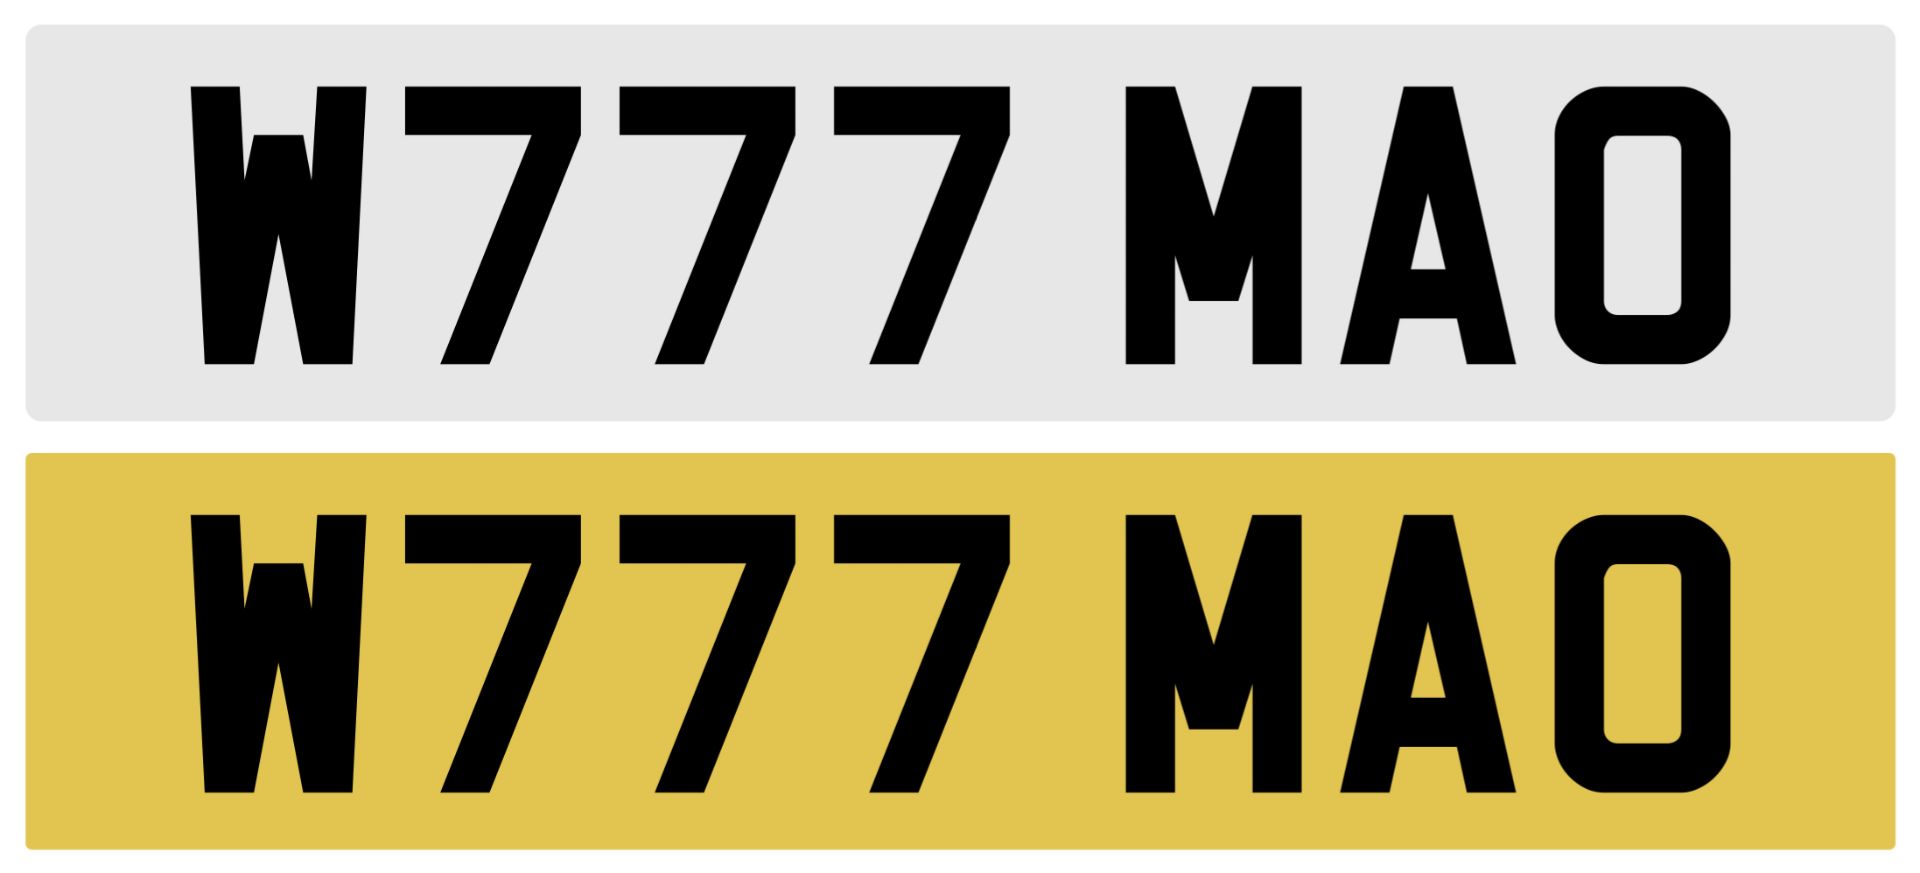 CHERISHED REGISTRATION NUMBER W777 MAO complete with retention document to be assigned before 17.